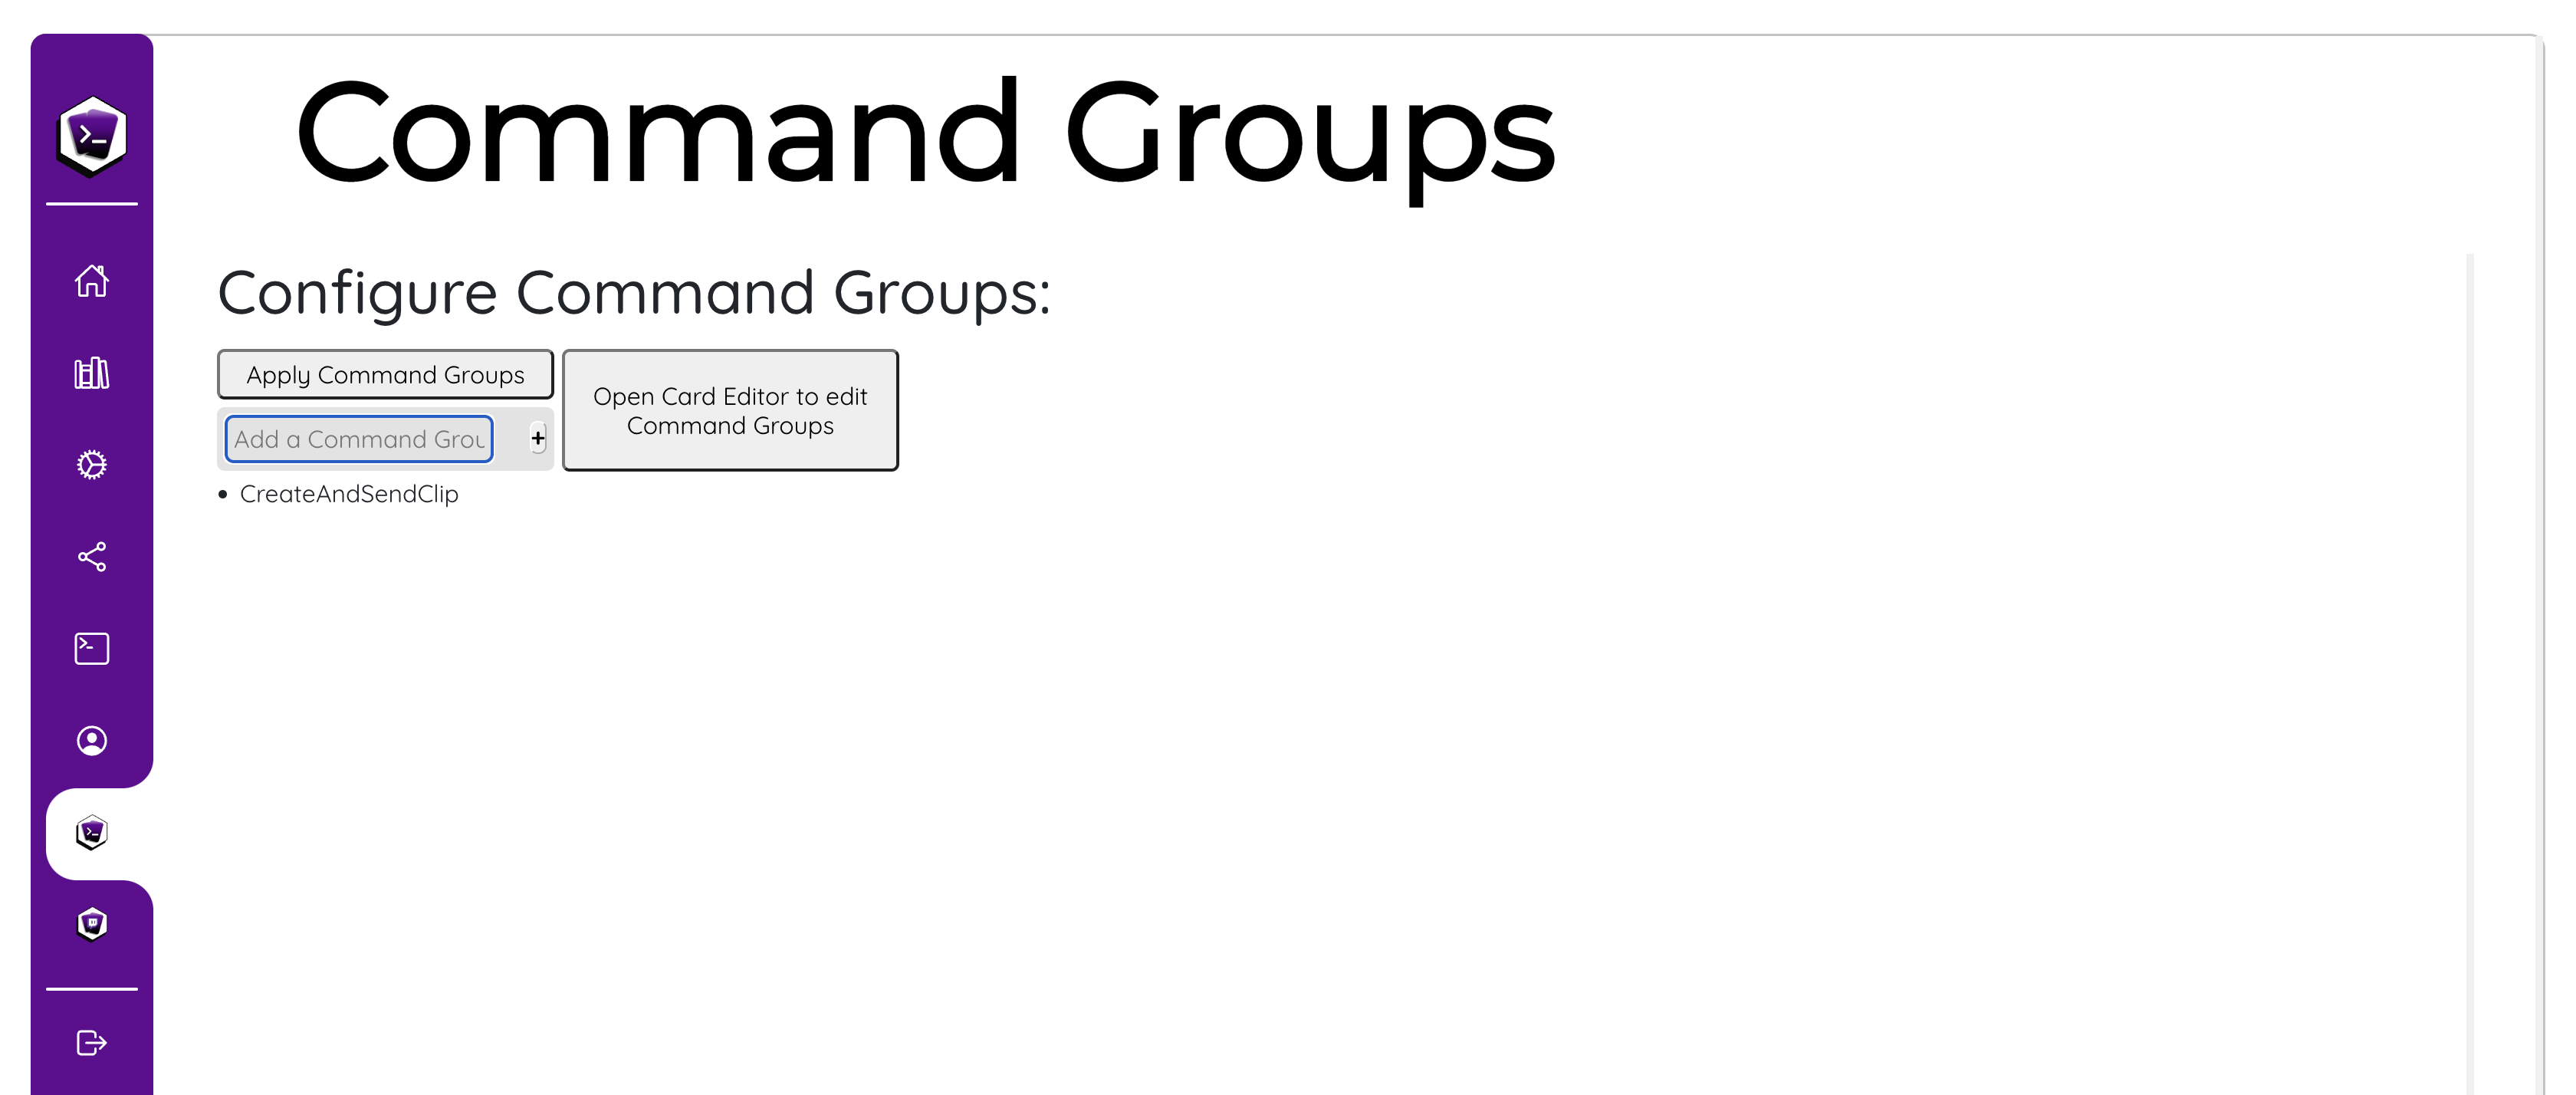 Command Groups Page